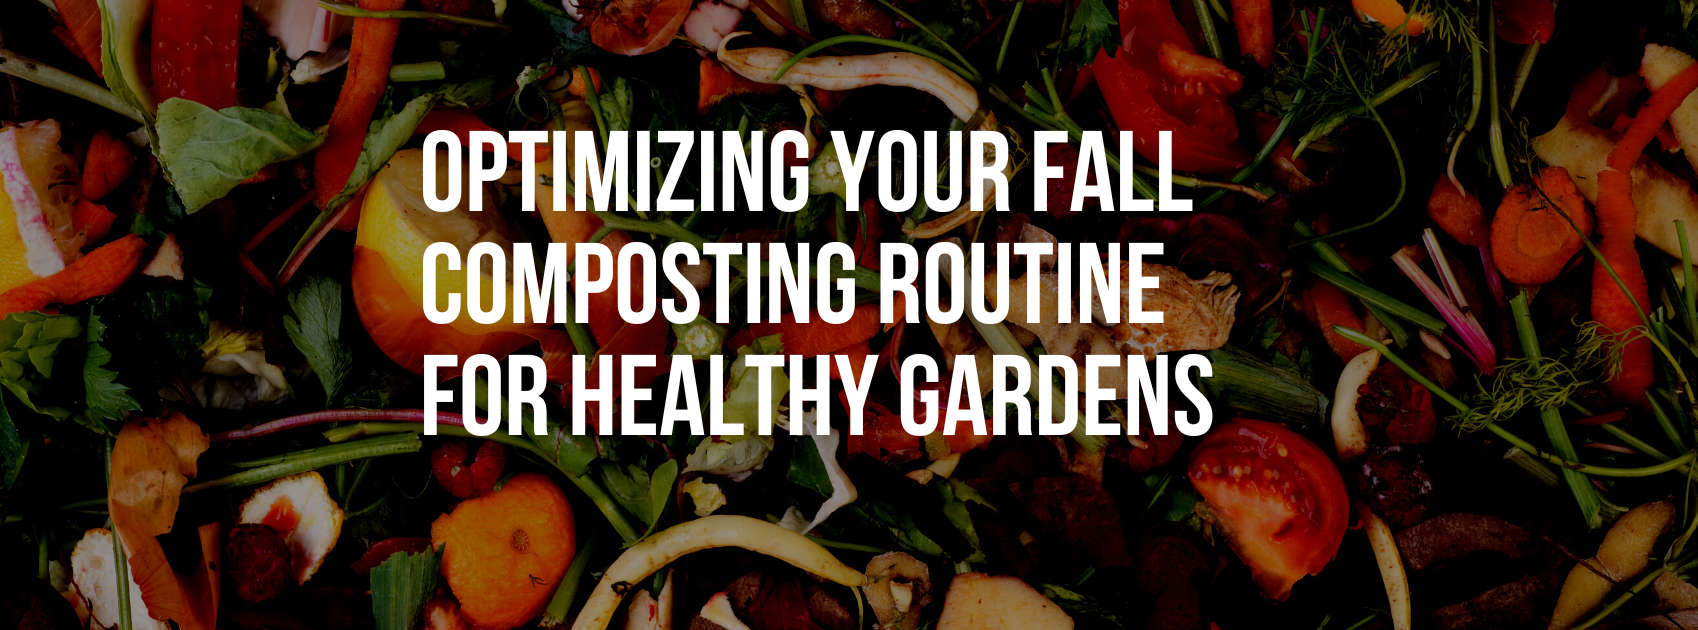 Optimizing Your Fall Composting Routine for Healthy Gardens